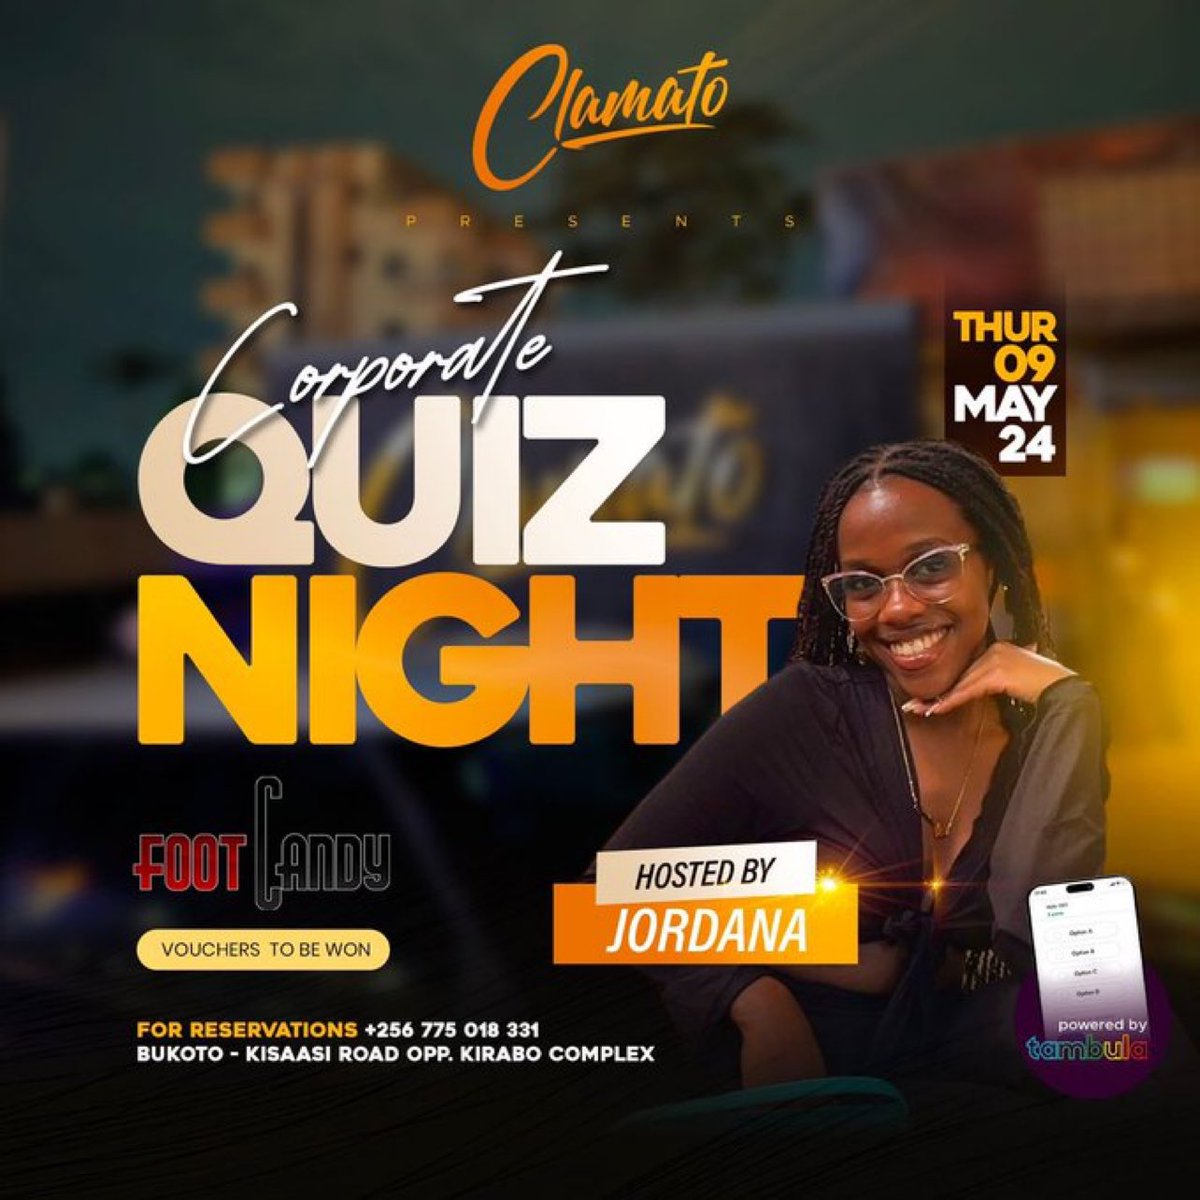 Cheers to the long weekend ahead 🤩 Let’s kickstart it with corporate quiz later on today at @clamato_lounge . Starts at 7pm till late ☺️ #ClamatoQuizNight